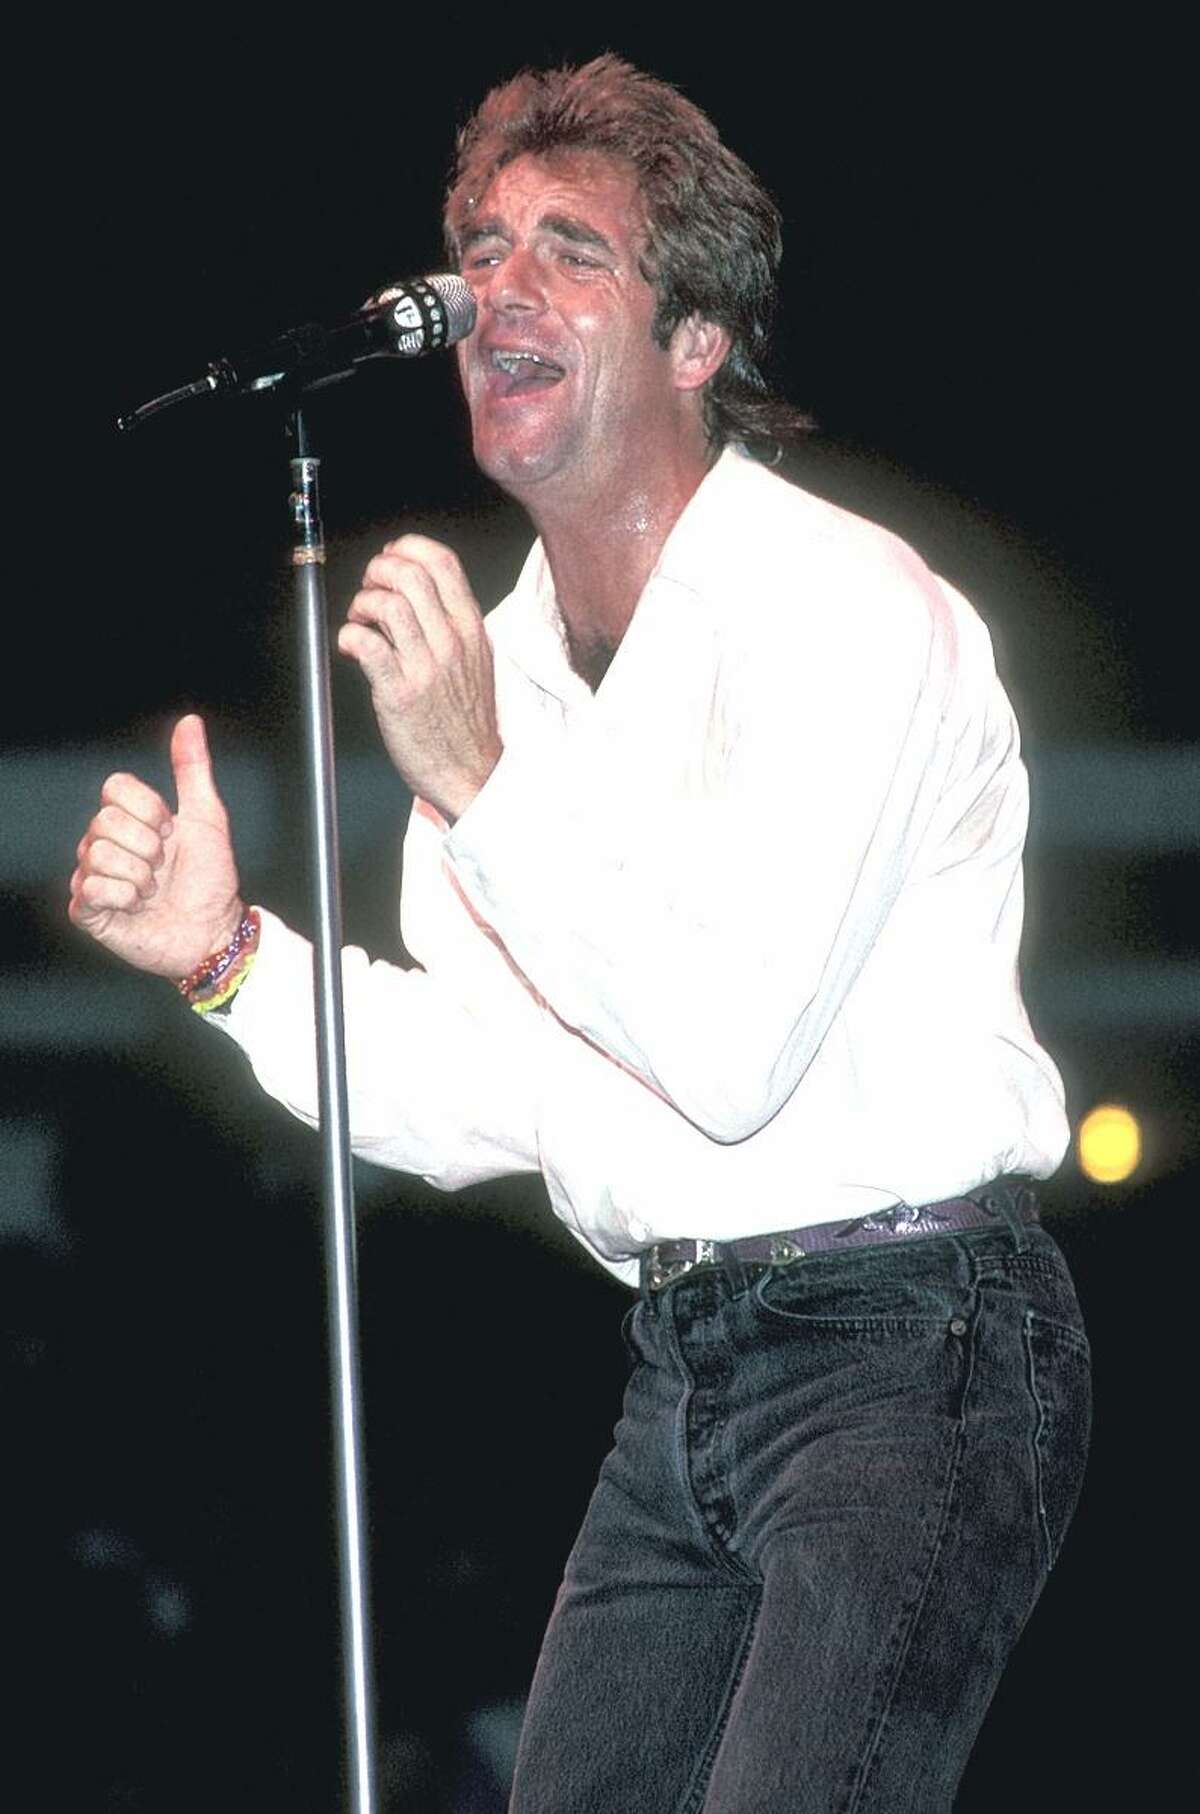 Singer Huey Lewis is shown performing on stage during a Huey Lewis & the News concert appearance.